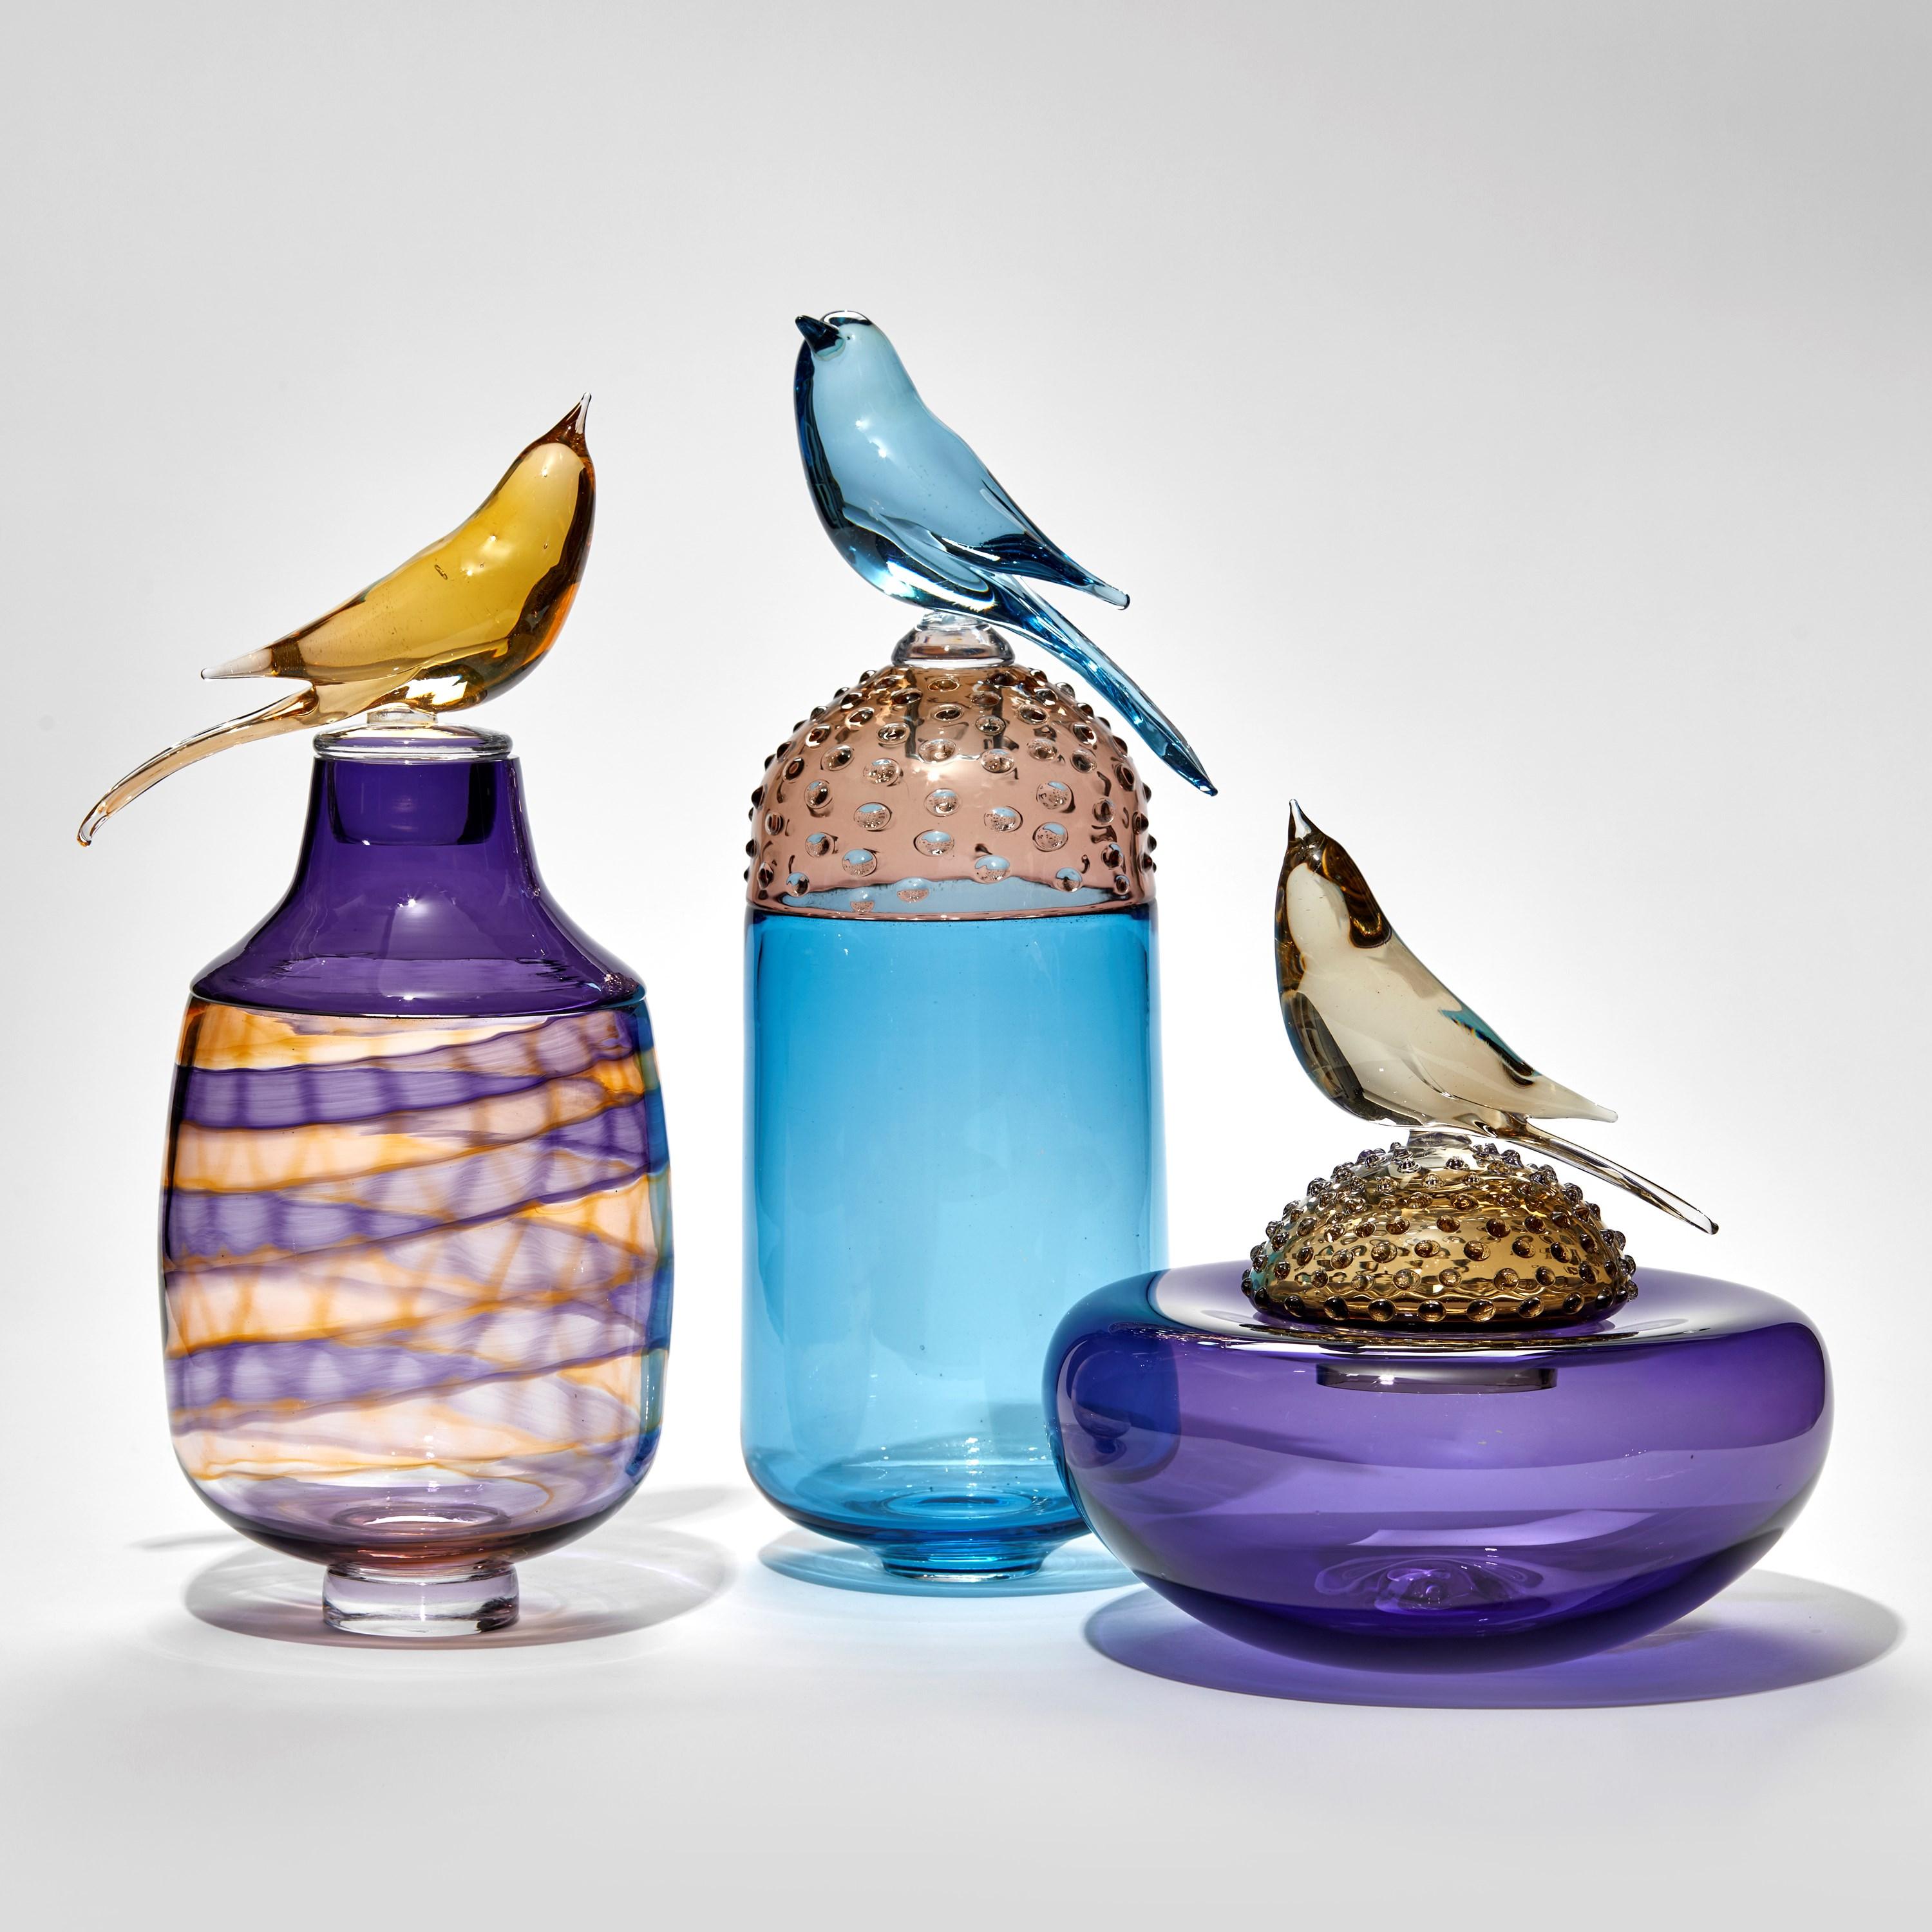 French All About Birds IV, a Purple Glass Vase with Perched Bird by Julie Johnson